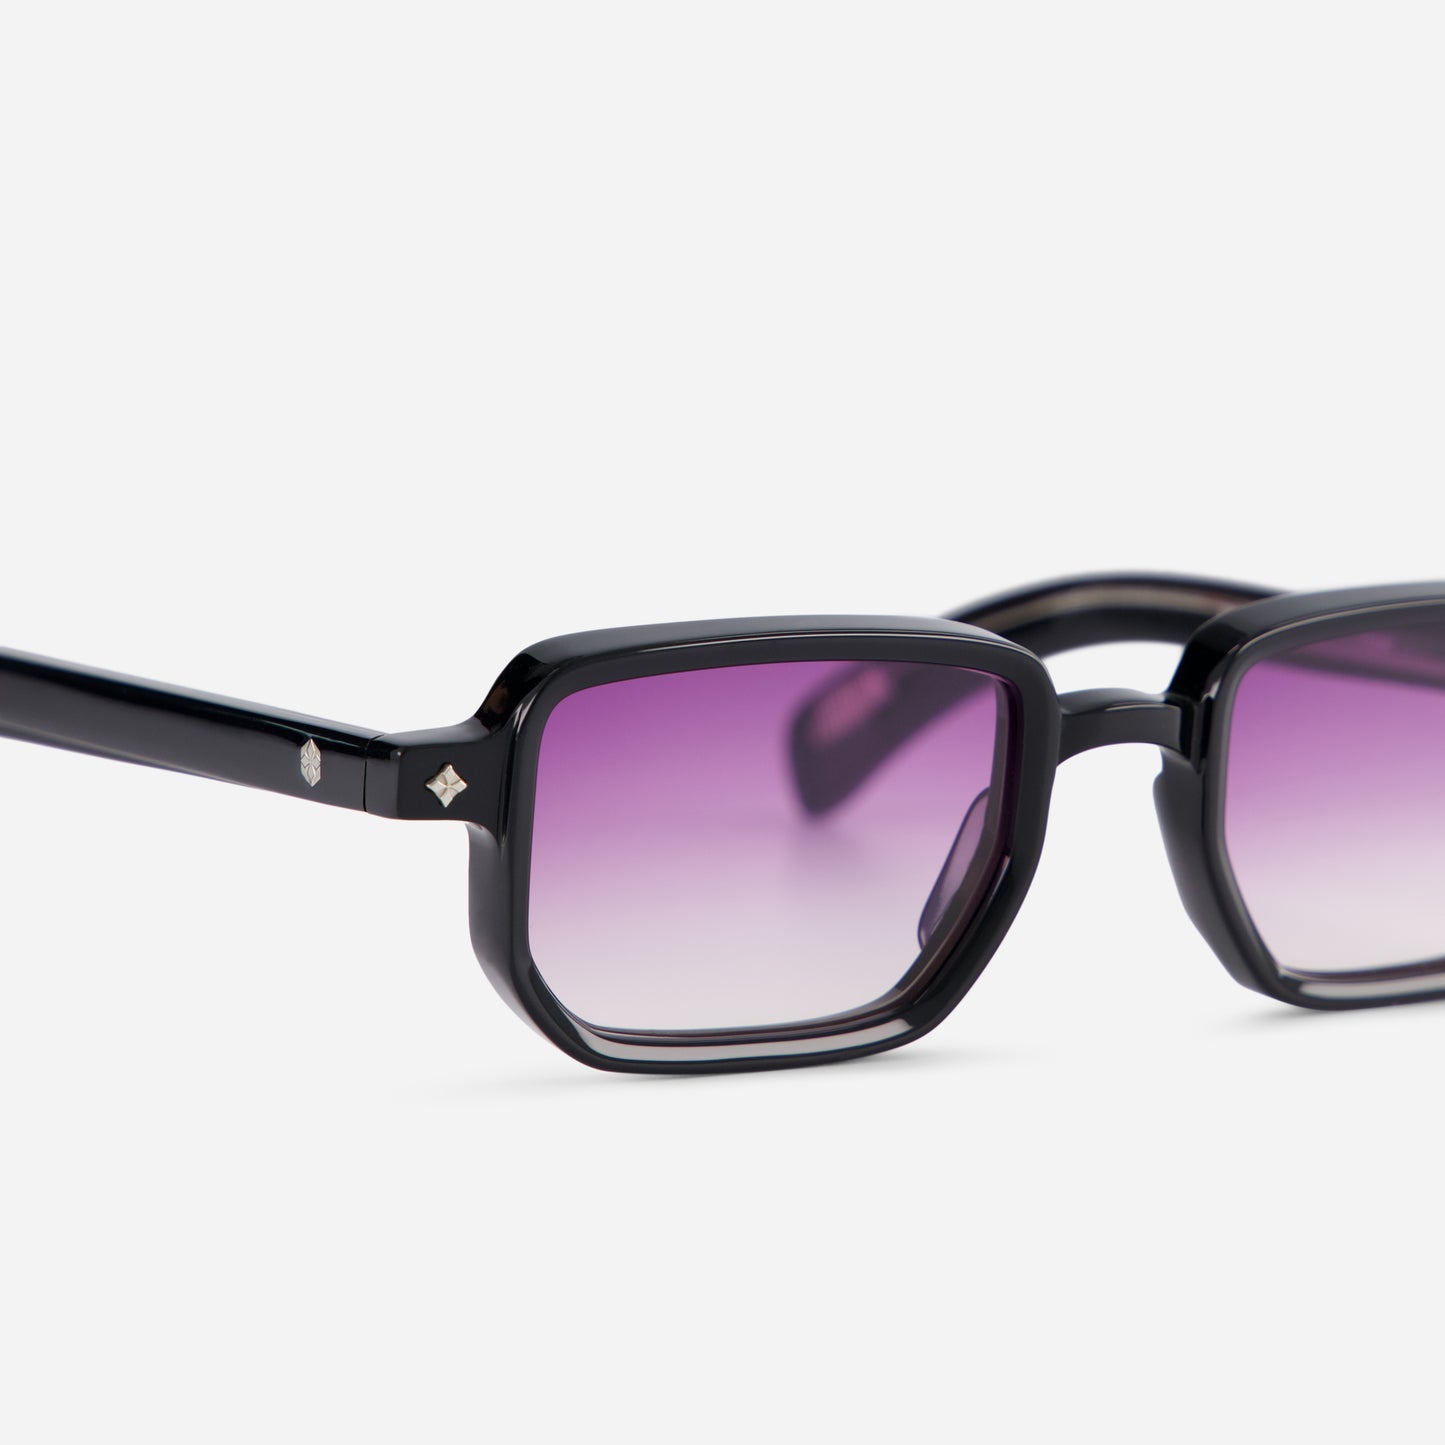 Ran N-1 offers a Japanese acetate frame in Noir color, enhanced by gradient purple lenses for a modern look.